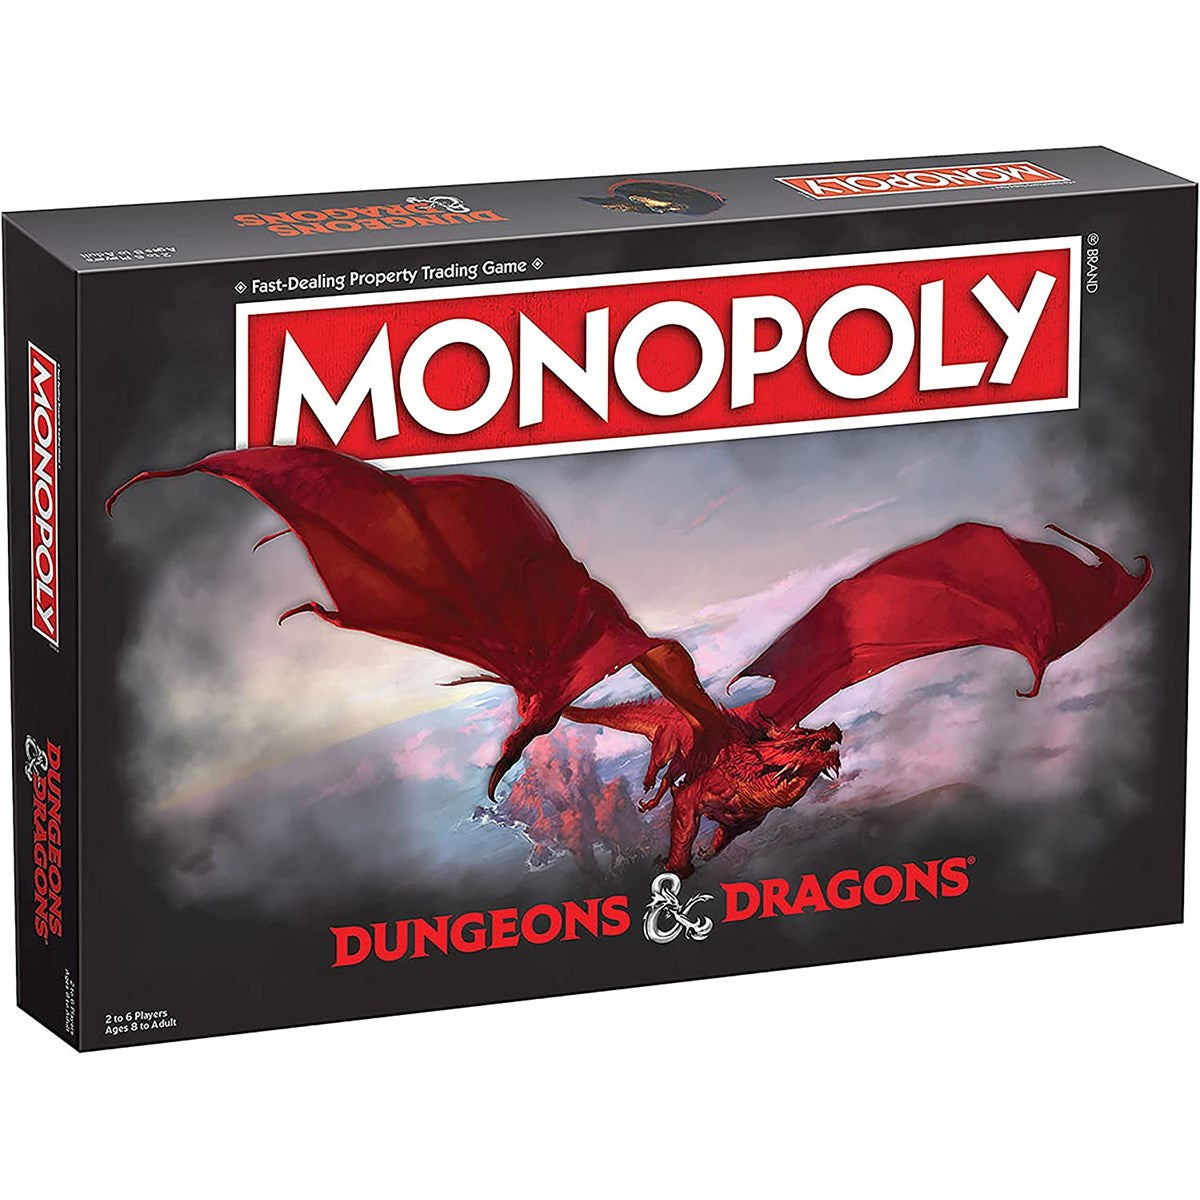 MONOPOLY - DUNGEONS & DRAGONS